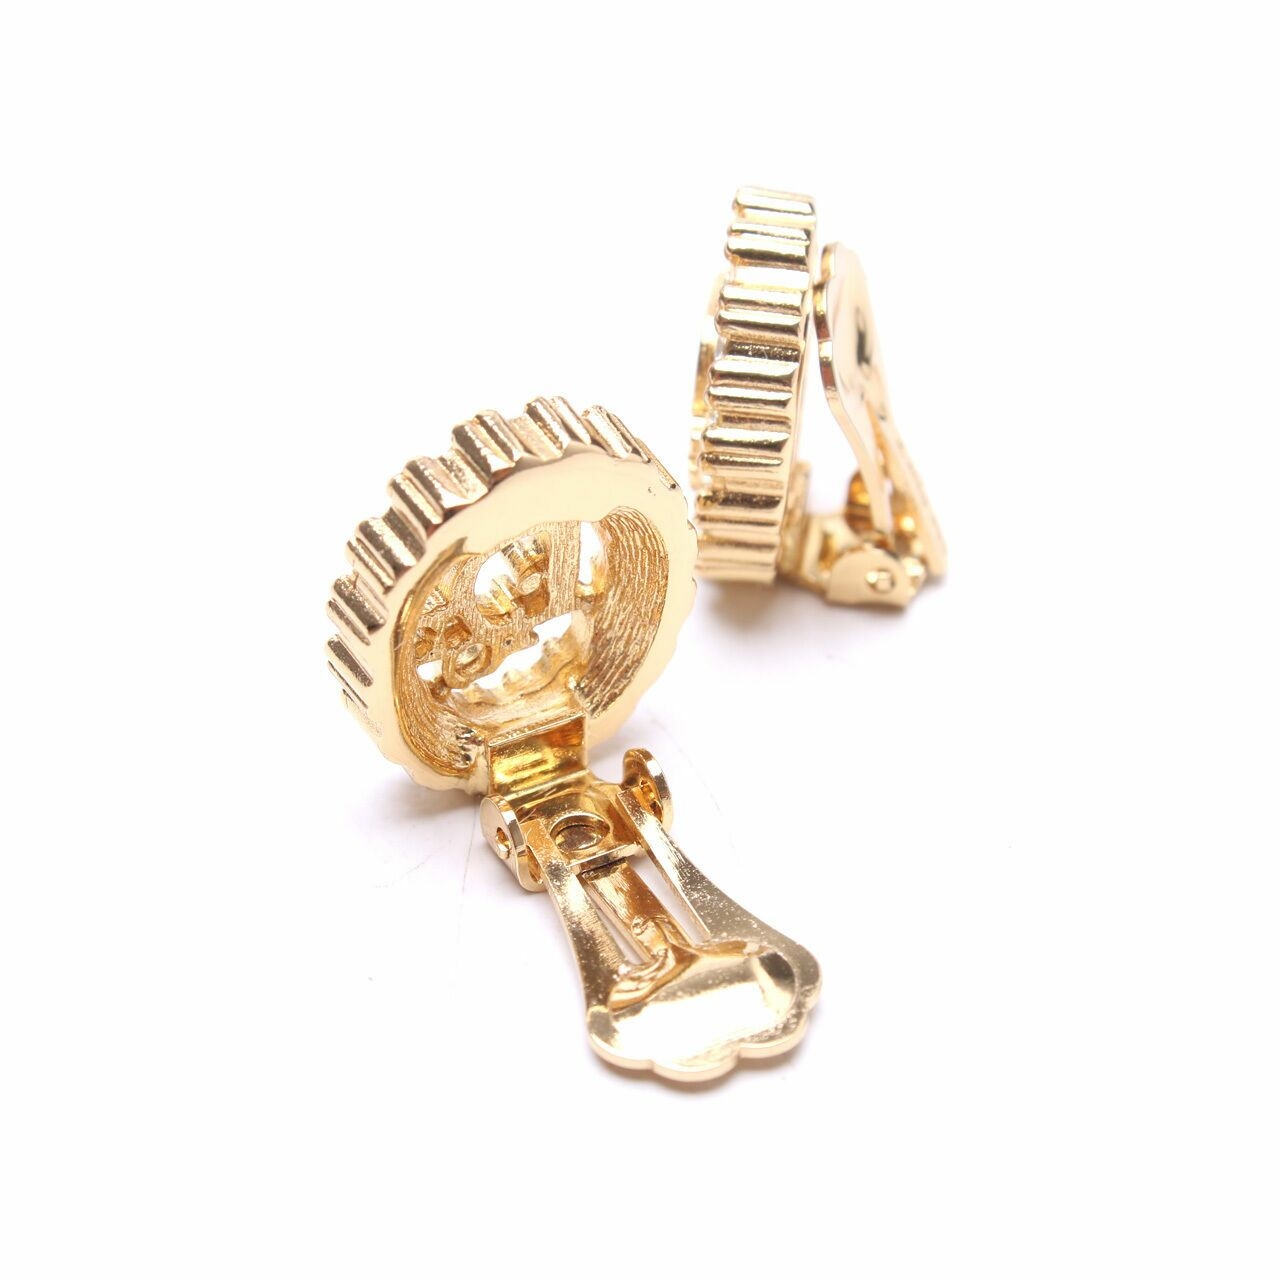 Christian Dior Vintage Gold Earrings